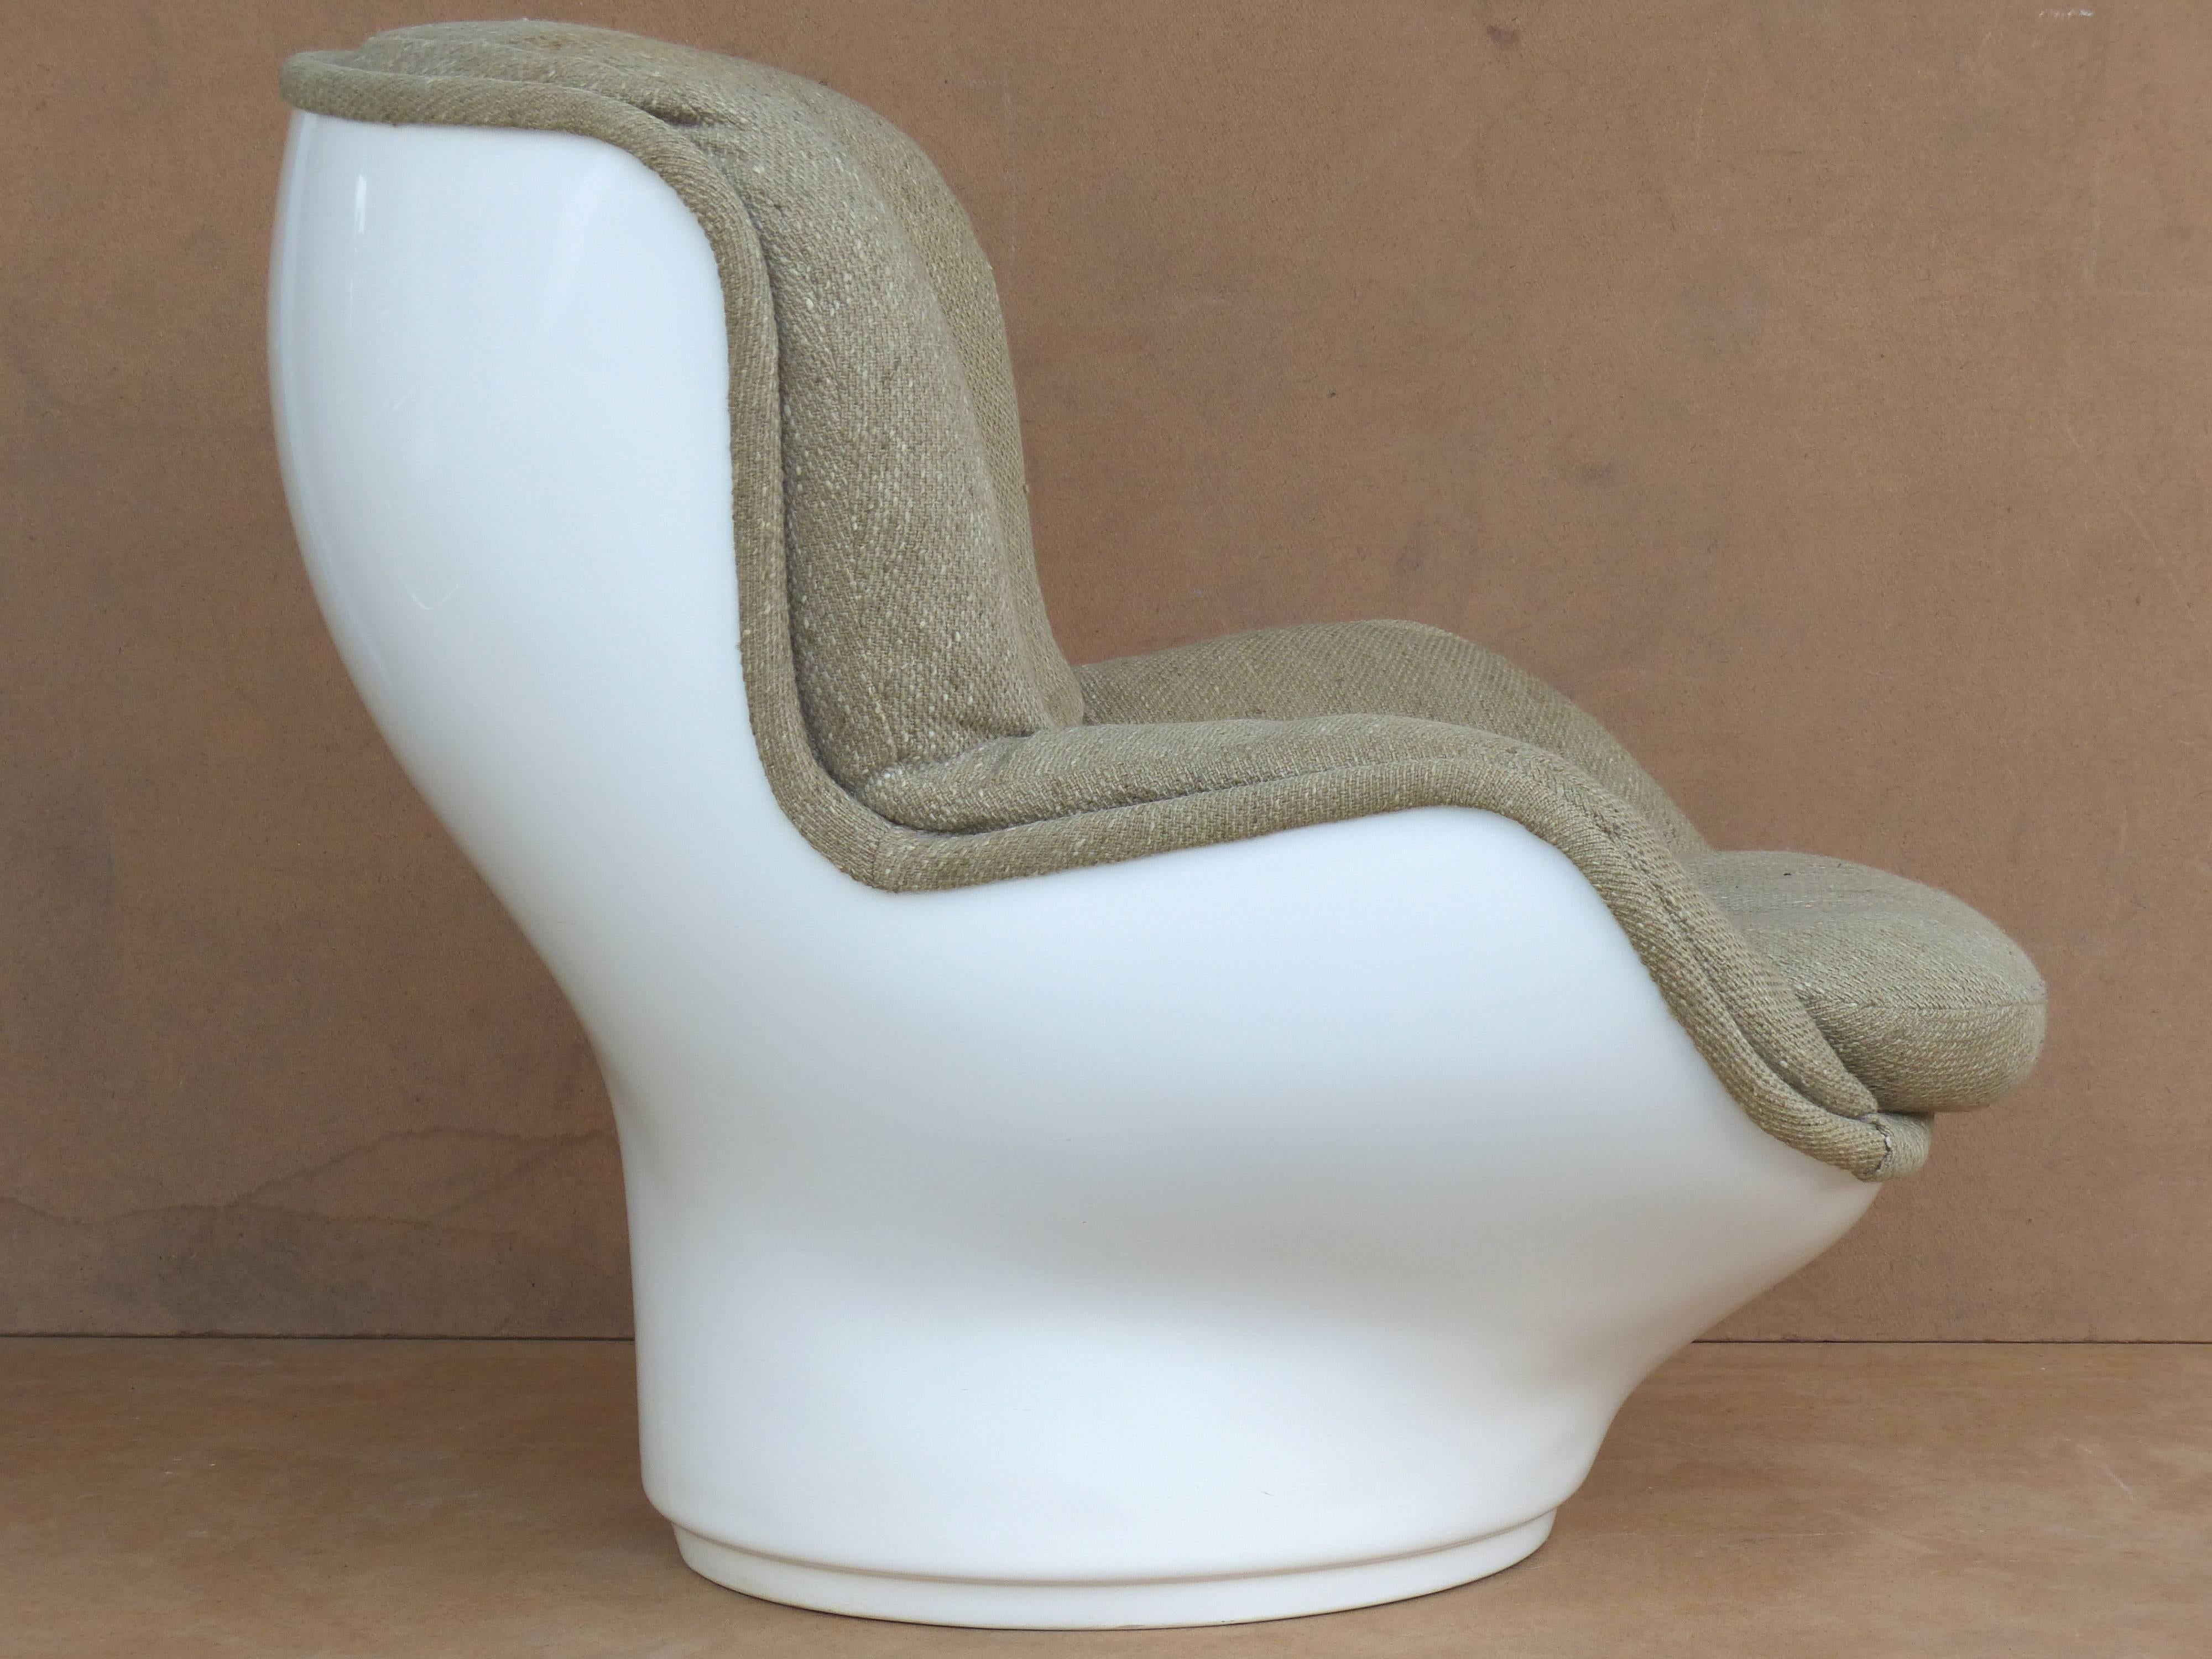 

 This iconic Mid-Century Modern design by Michel Cadestin from the 1960s was manufactured by Airbourne International in France. Referred to as the "Karate" chair, it is made of a fiberglass shell with upholstered seat and ottoman. A